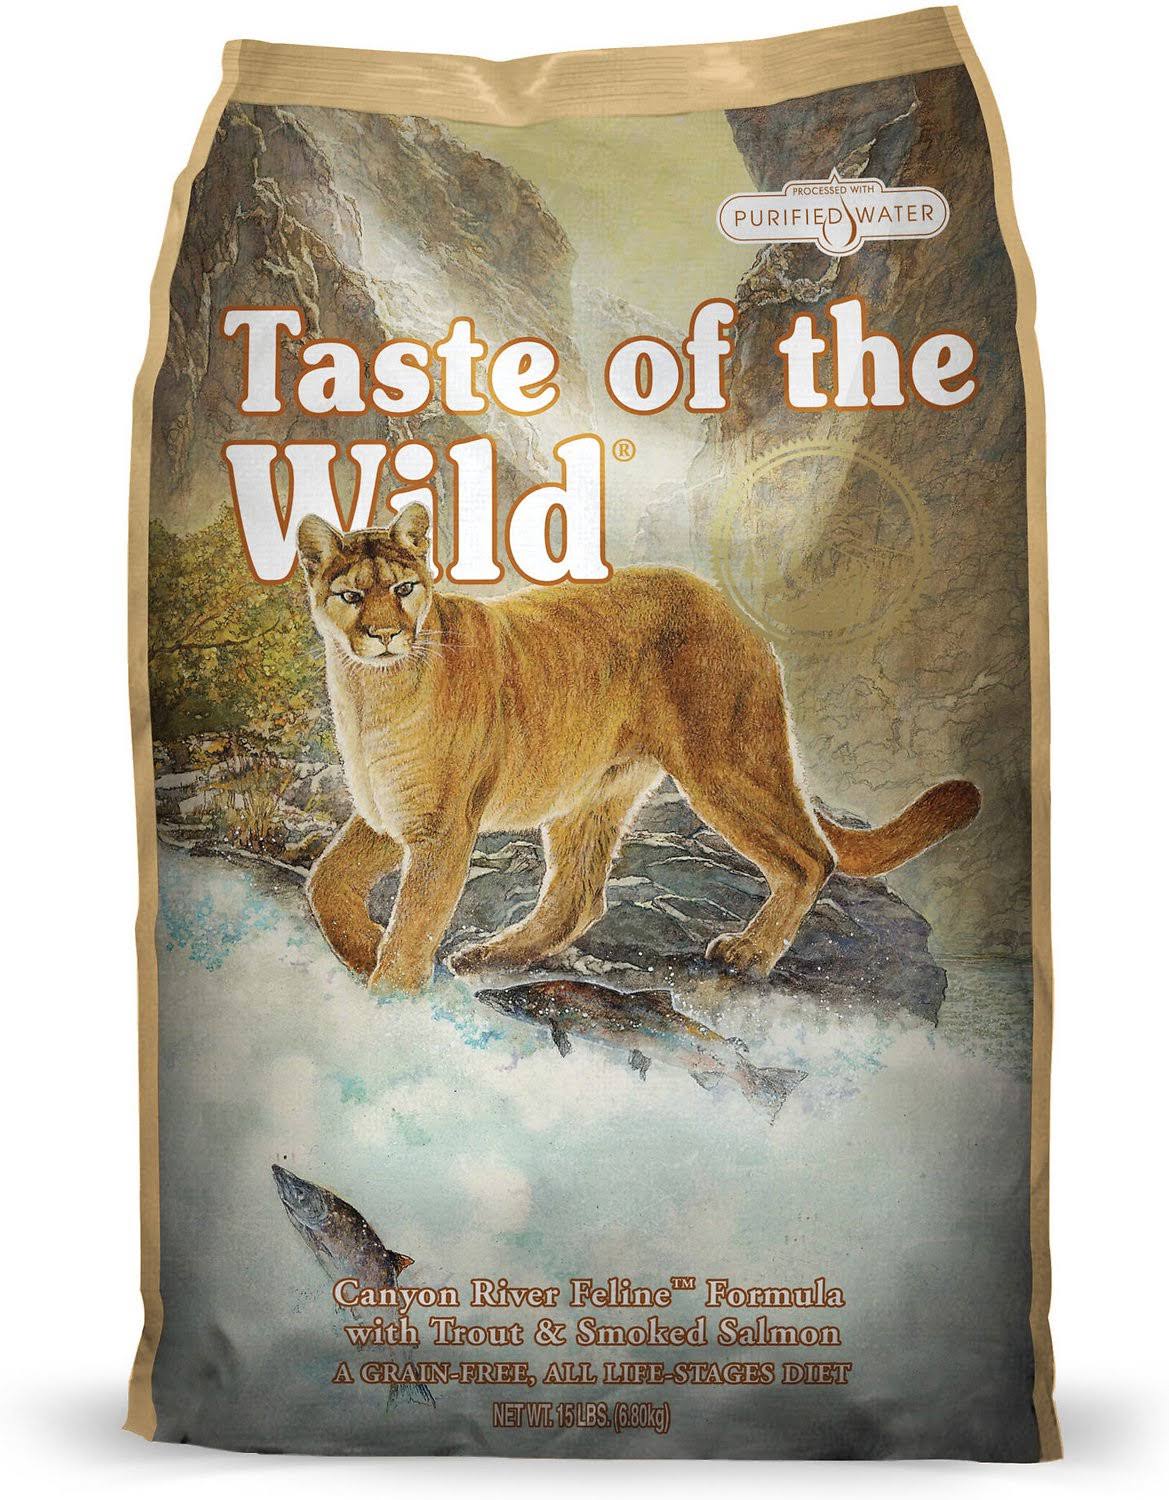 Taste of the Wild Canyon River Grain Free Dry Cat Food